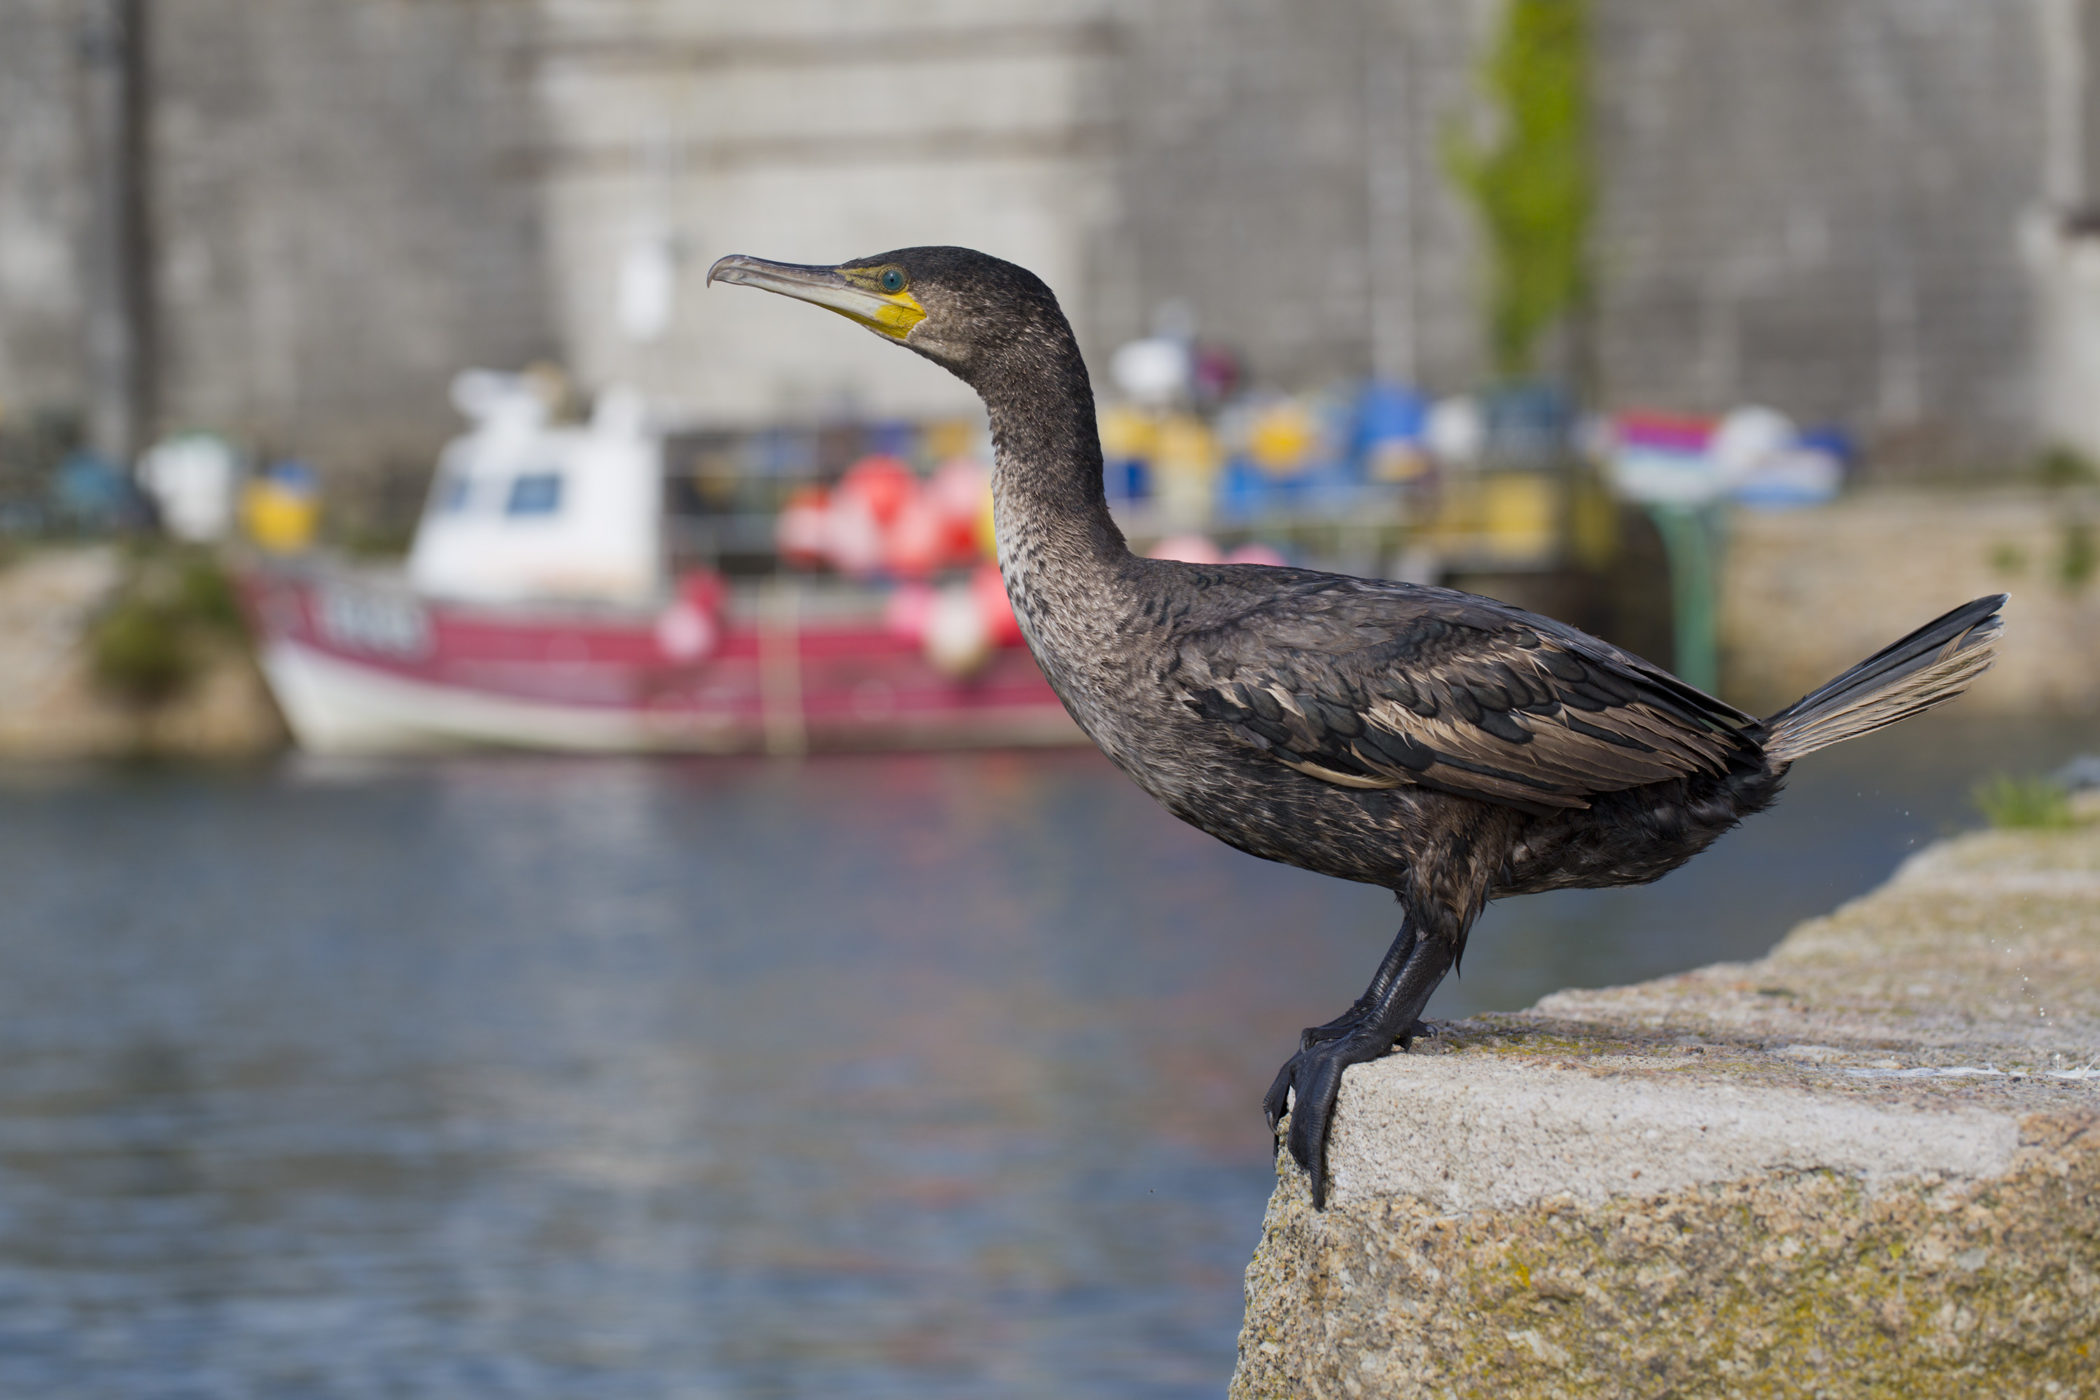 This young cormorant was photographed on South Quay, Hayle.  To distinguish between shags and cormorants one way is to watch how they dive: cormorants slip under water whilst shags jump to dive under. Credit: David Chapman